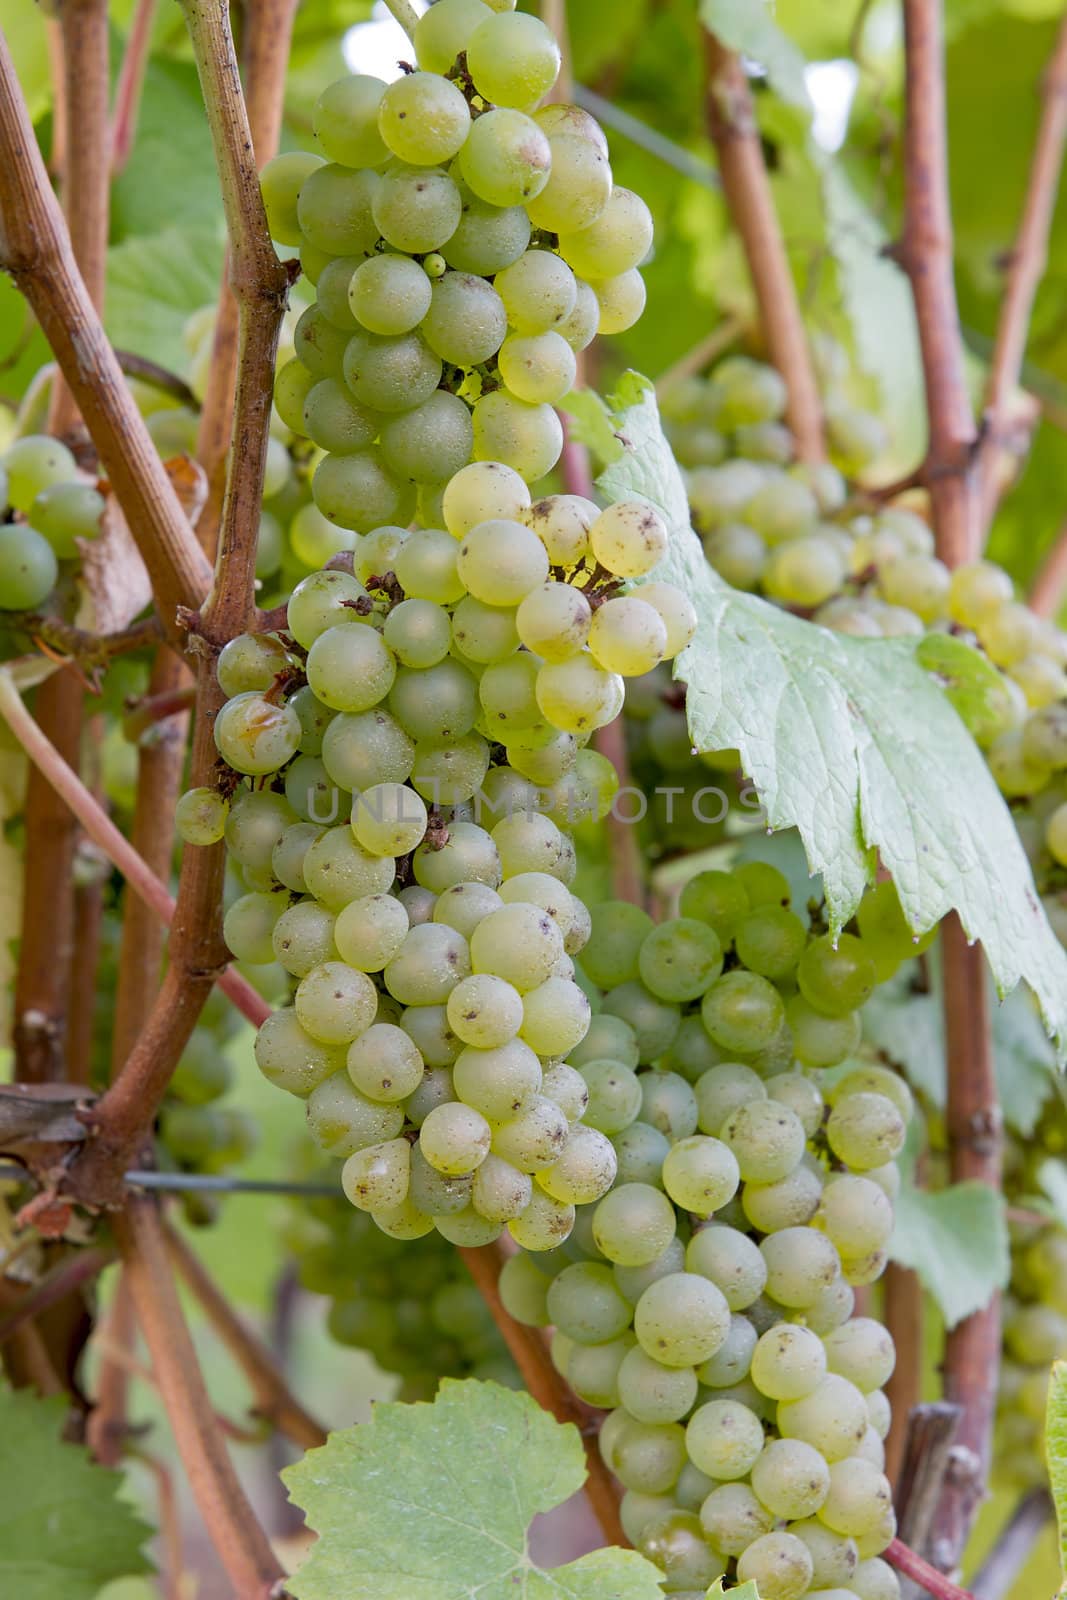 Bunches of White Wine Grapes by jpldesigns